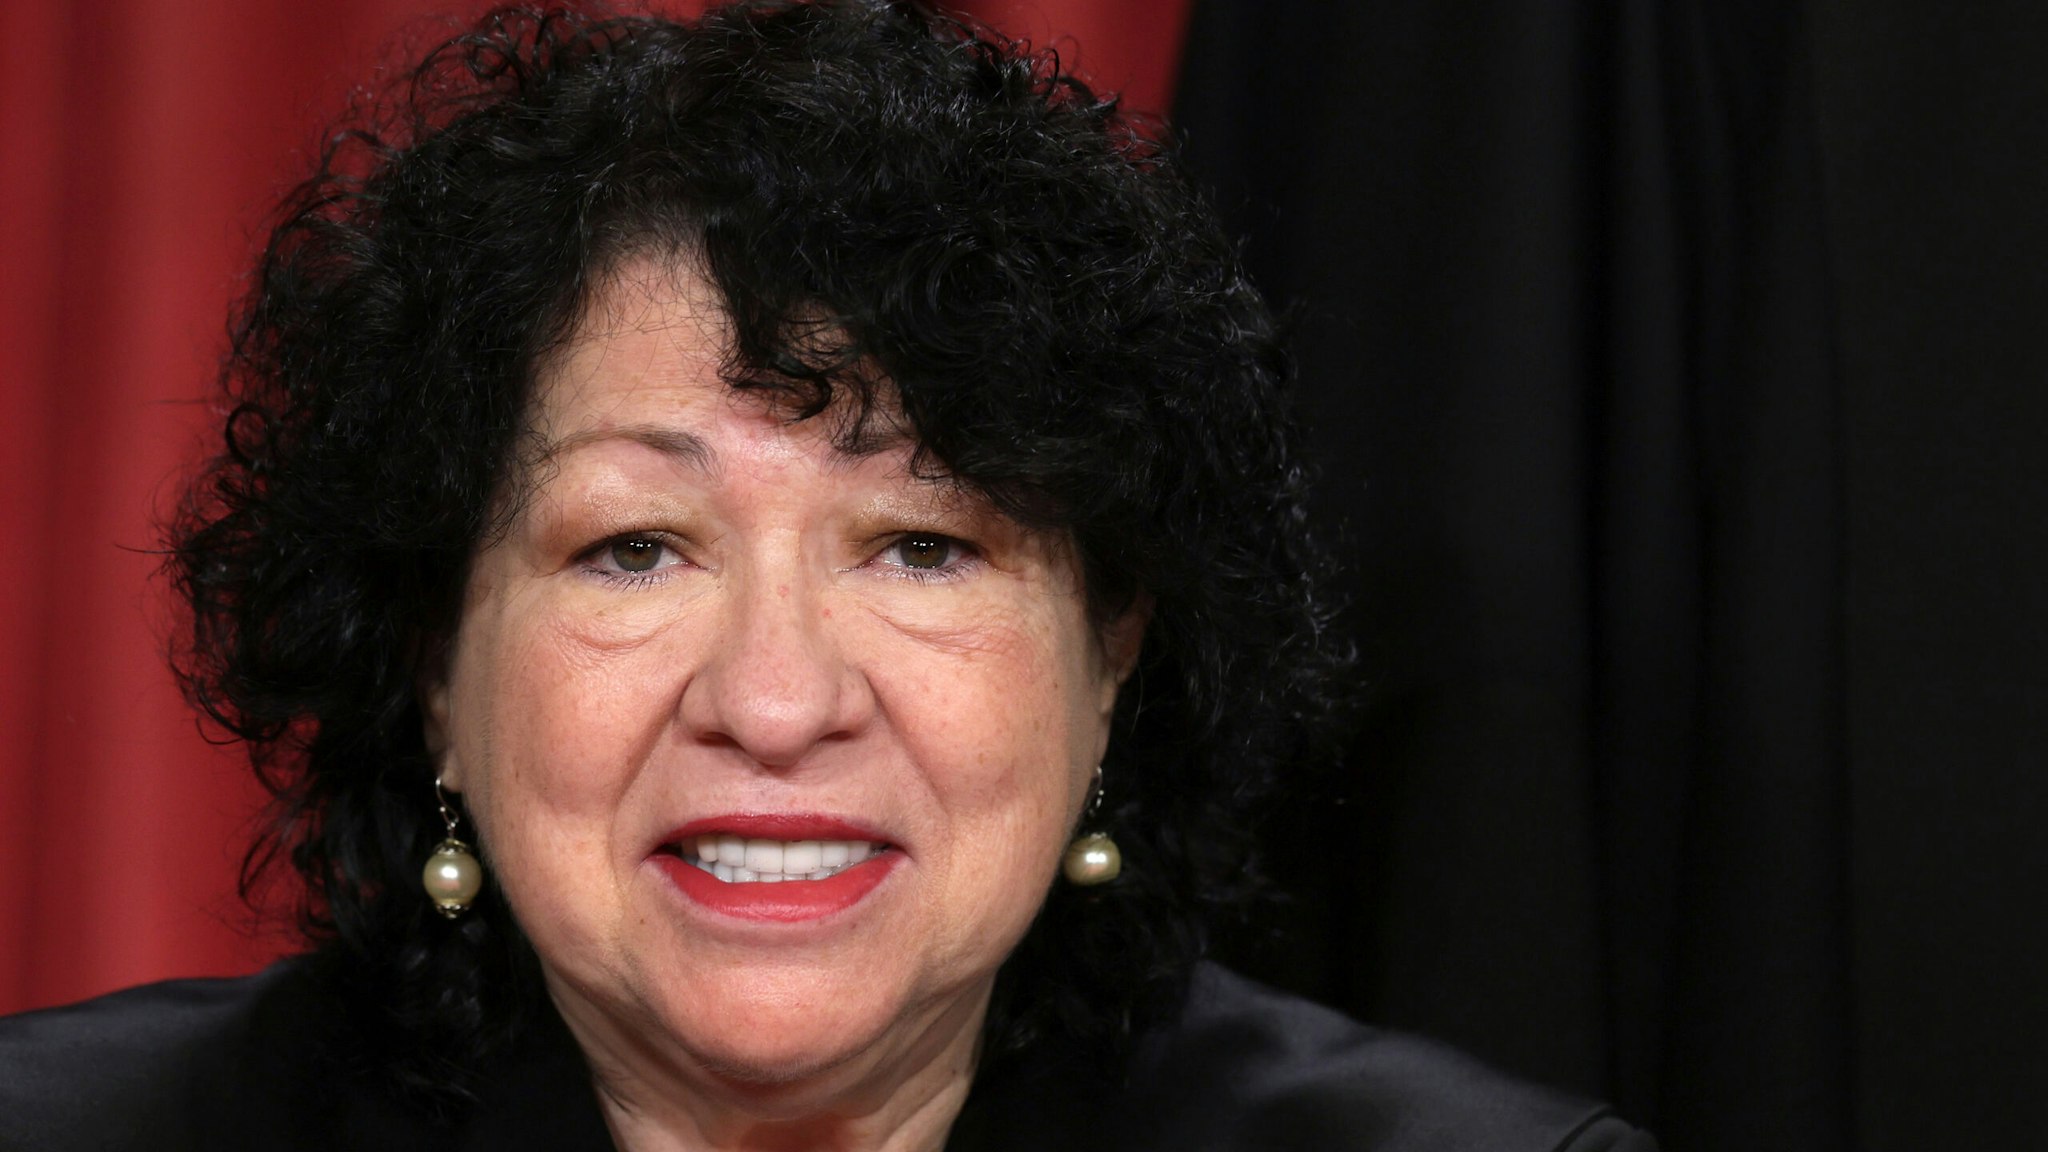 WASHINGTON, DC - OCTOBER 07: United States Supreme Court Associate Justice Sonia Sotomayor poses for an official portrait at the East Conference Room of the Supreme Court building on October 7, 2022 in Washington, DC. The Supreme Court has begun a new term after Associate Justice Ketanji Brown Jackson was officially added to the bench in September.